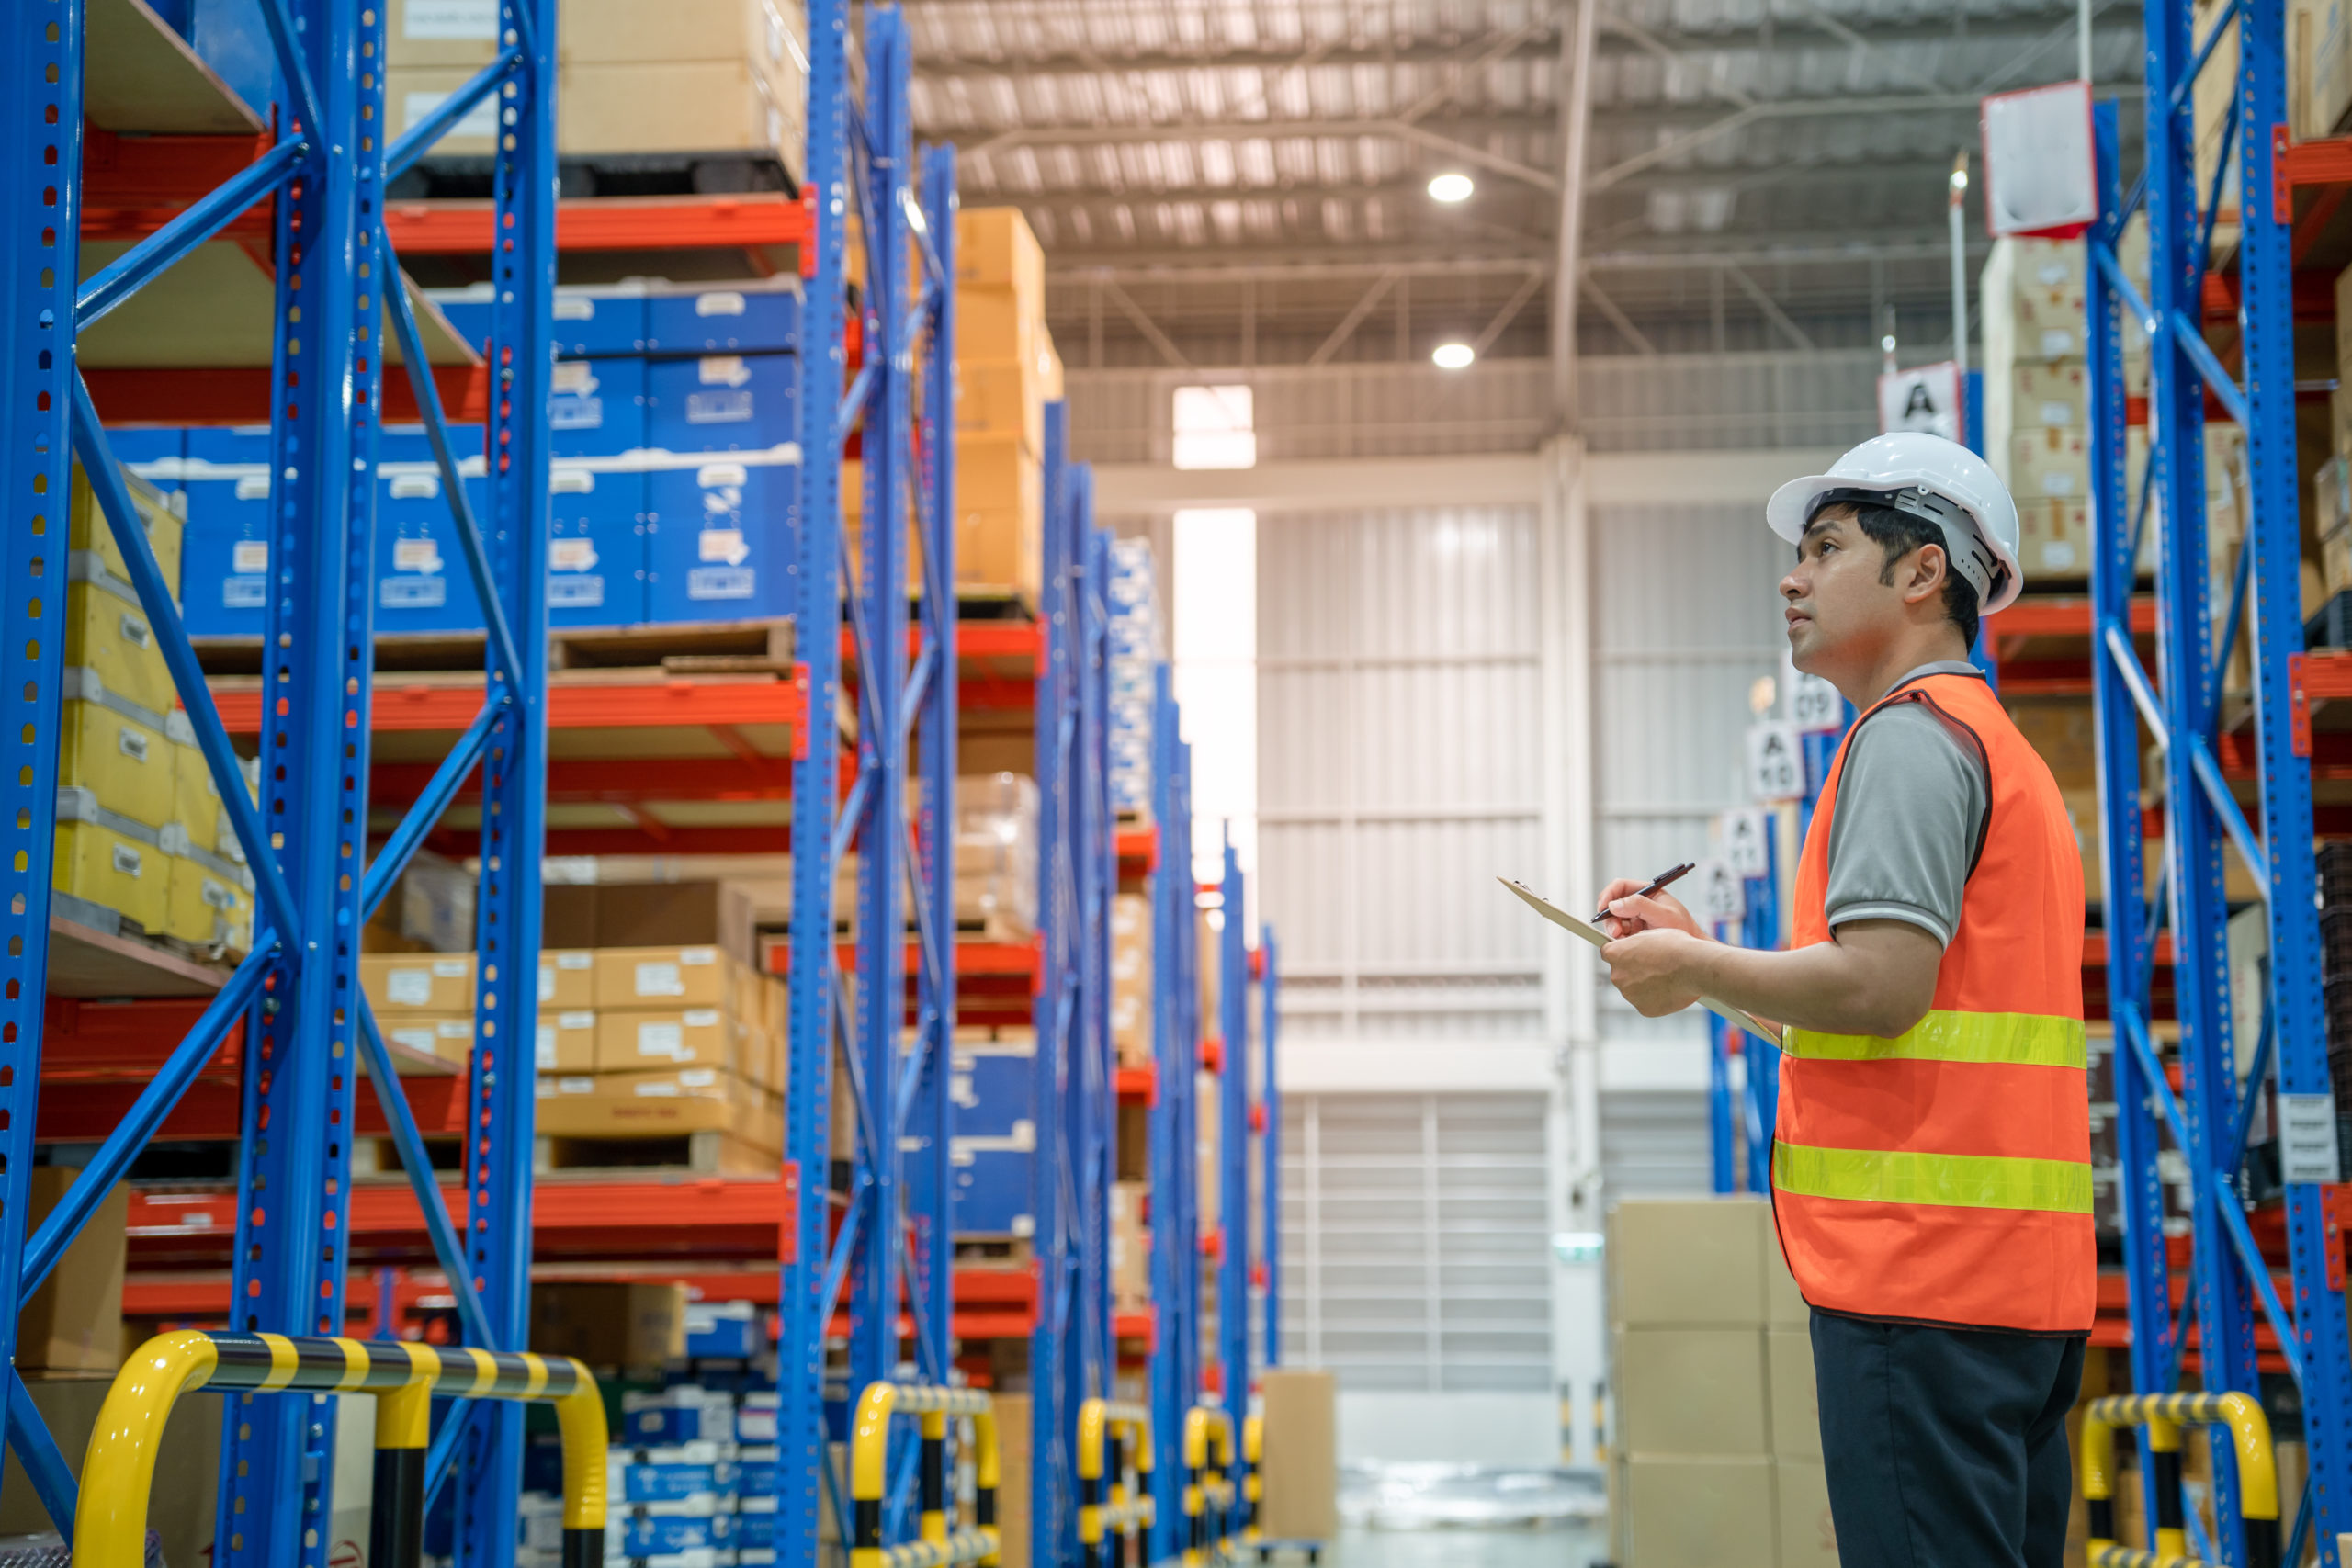 Worker monitoring goods for supply chain